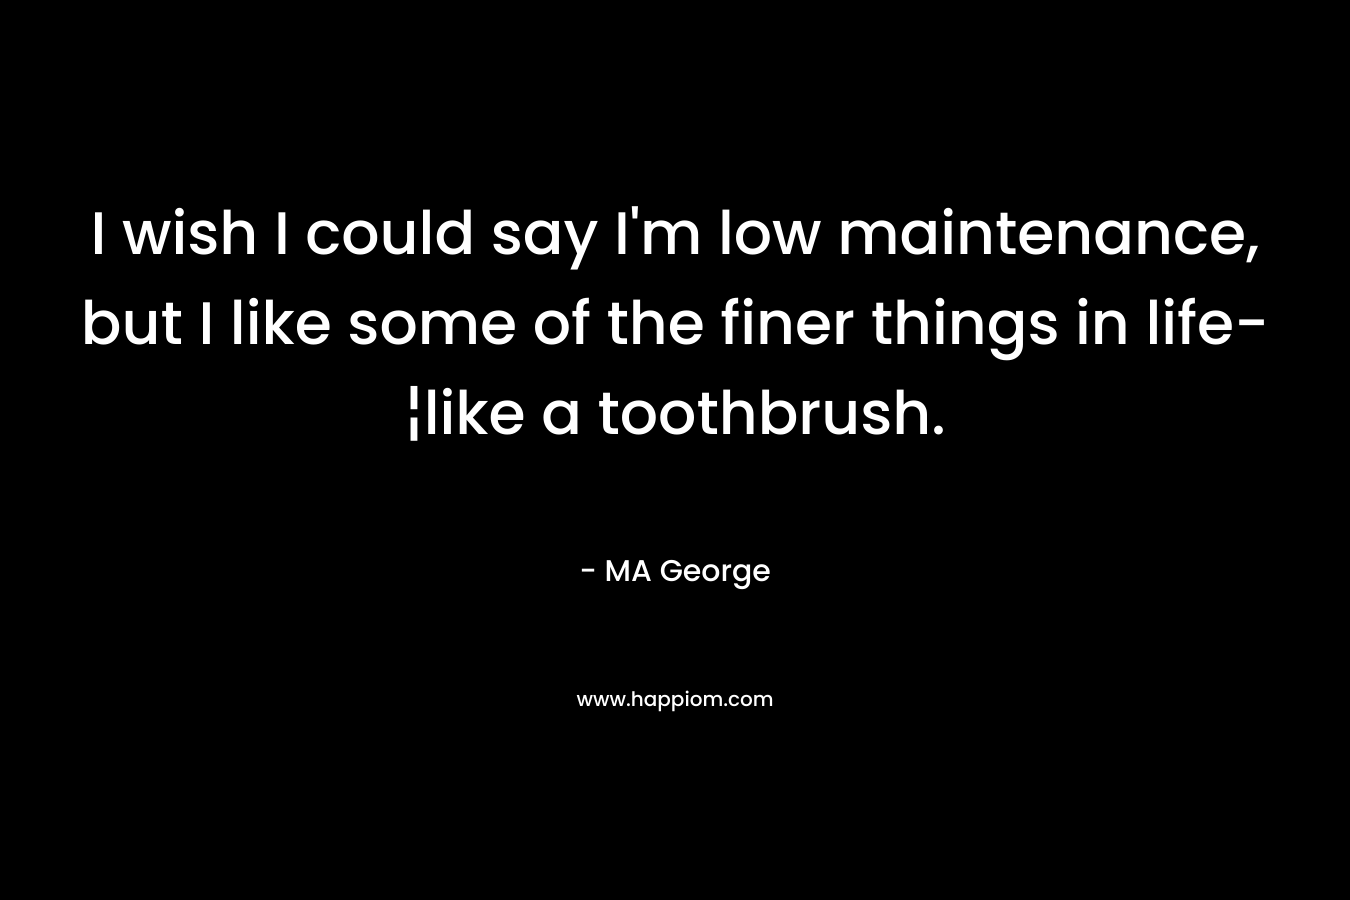 I wish I could say I’m low maintenance, but I like some of the finer things in life-¦like a toothbrush. – MA George